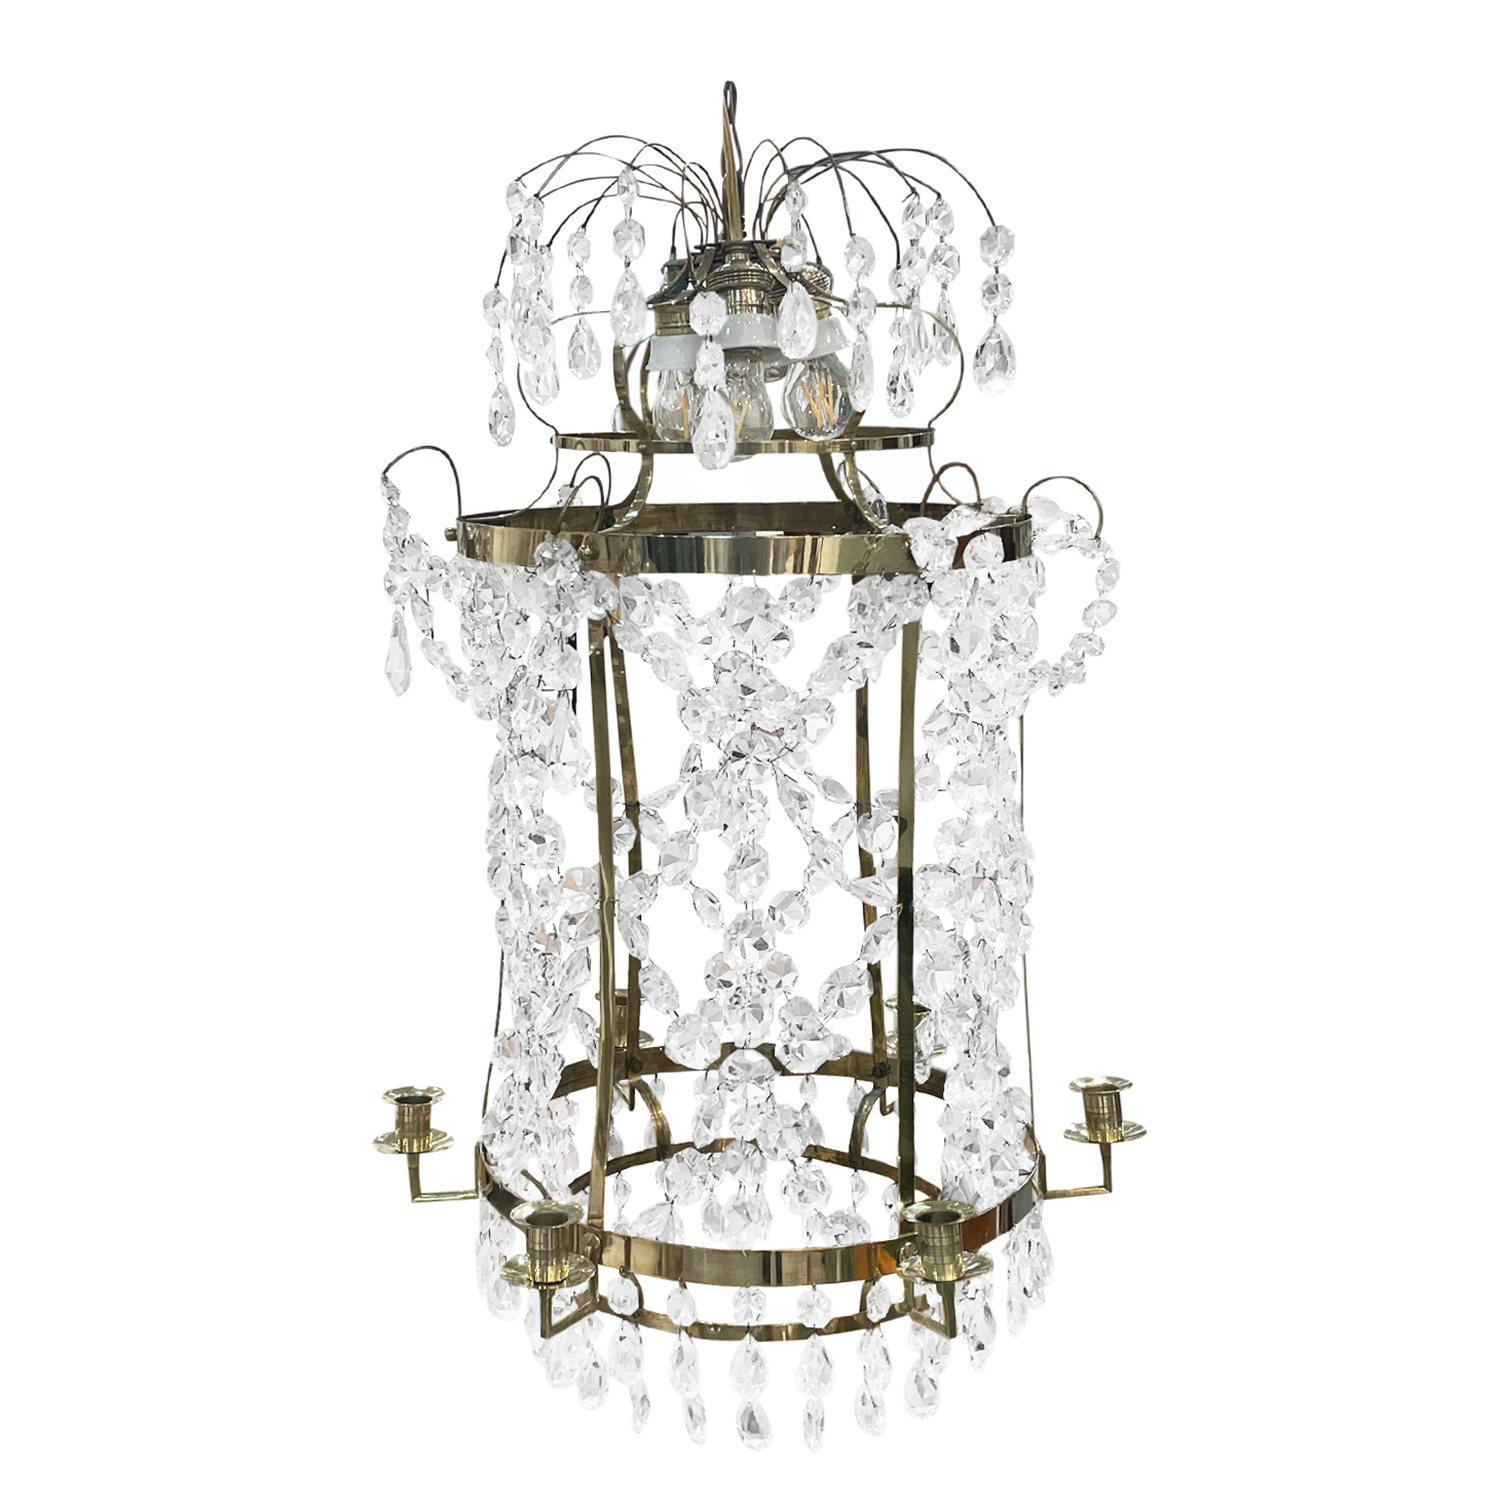 19th Century French Antique Empire Crystal Glass Chandelier – Parisian Candelabra